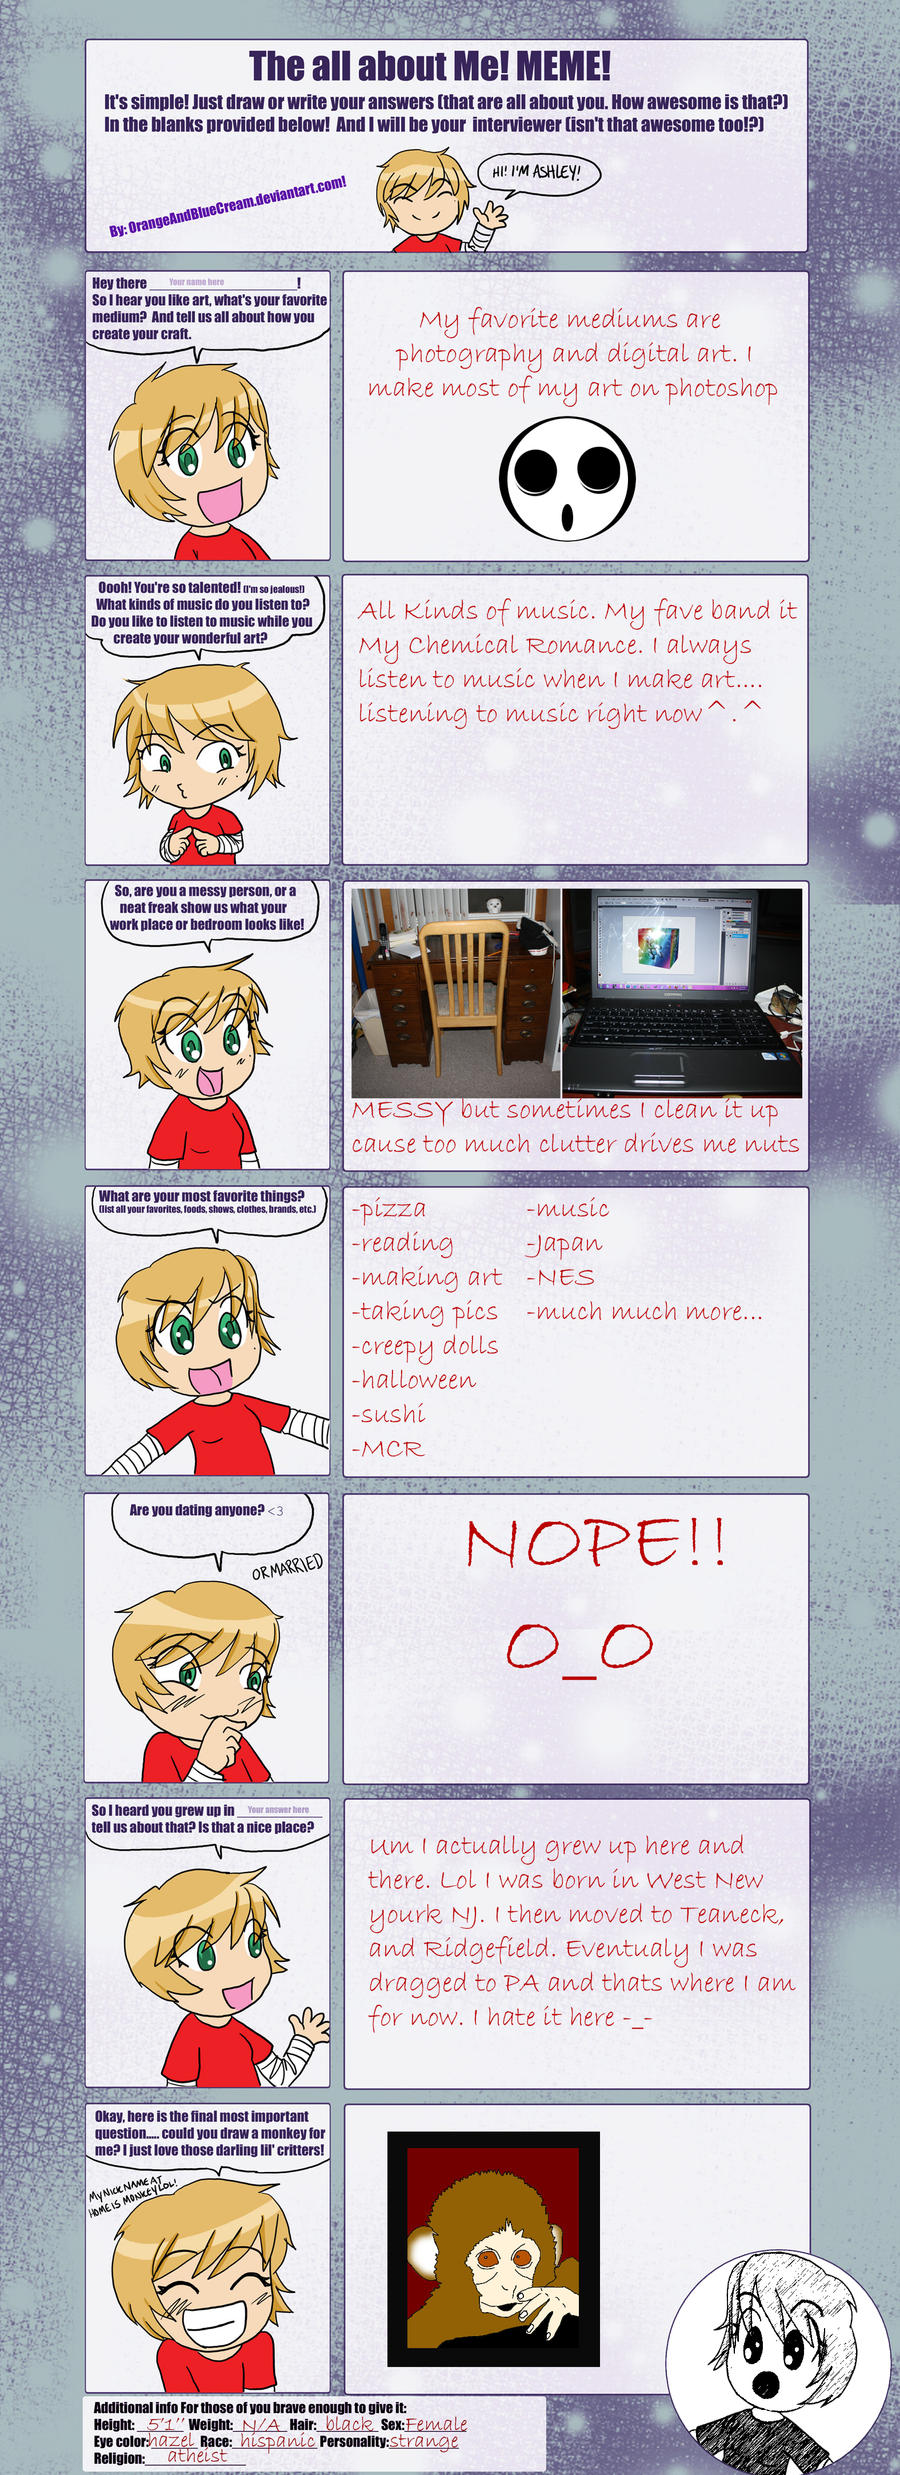 The all about me meme :XD: by poison-is-my-koolaid on DeviantArt